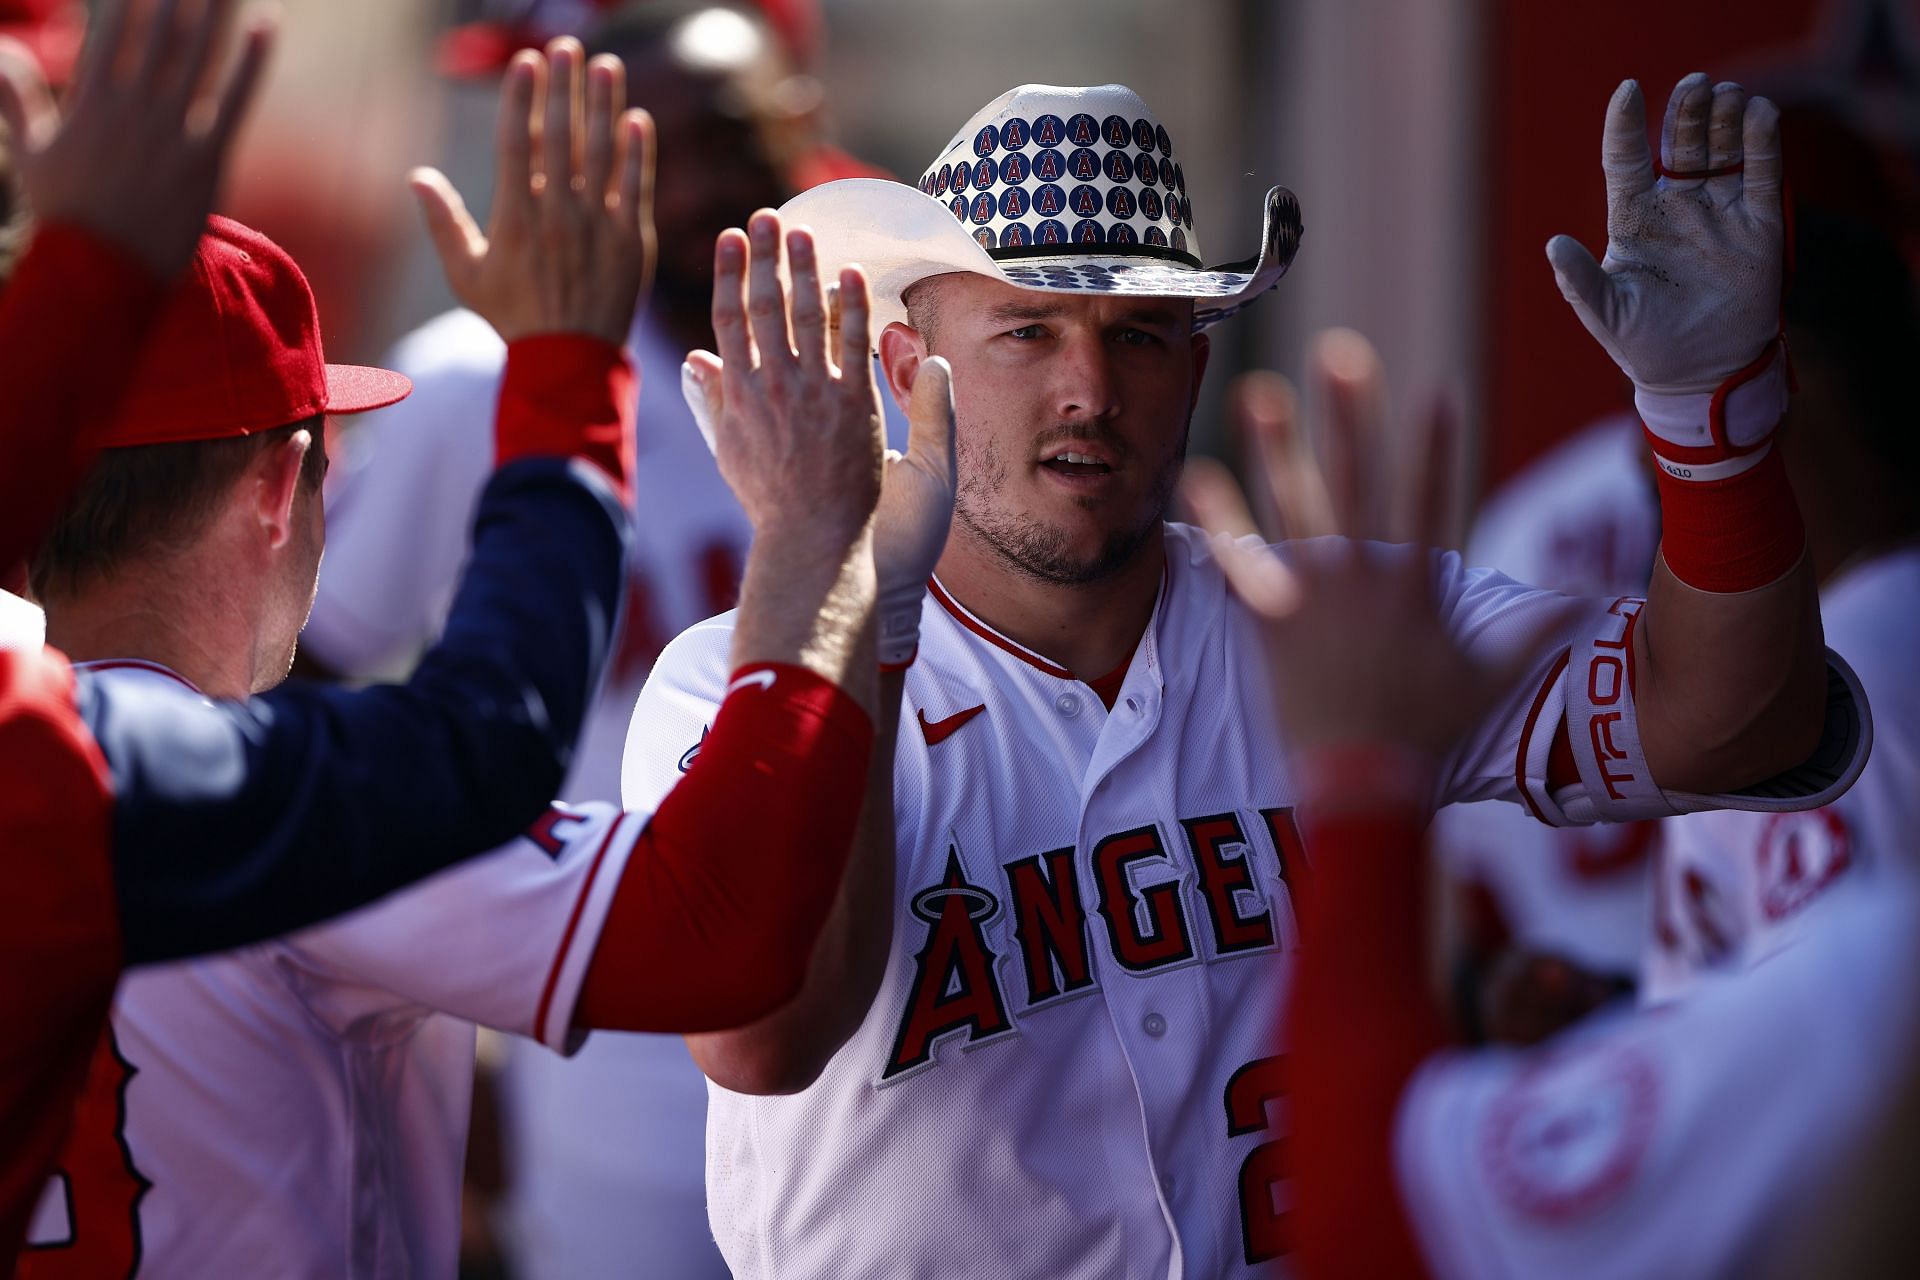 Angels fans hypnotized the camera with Mike Trout's face